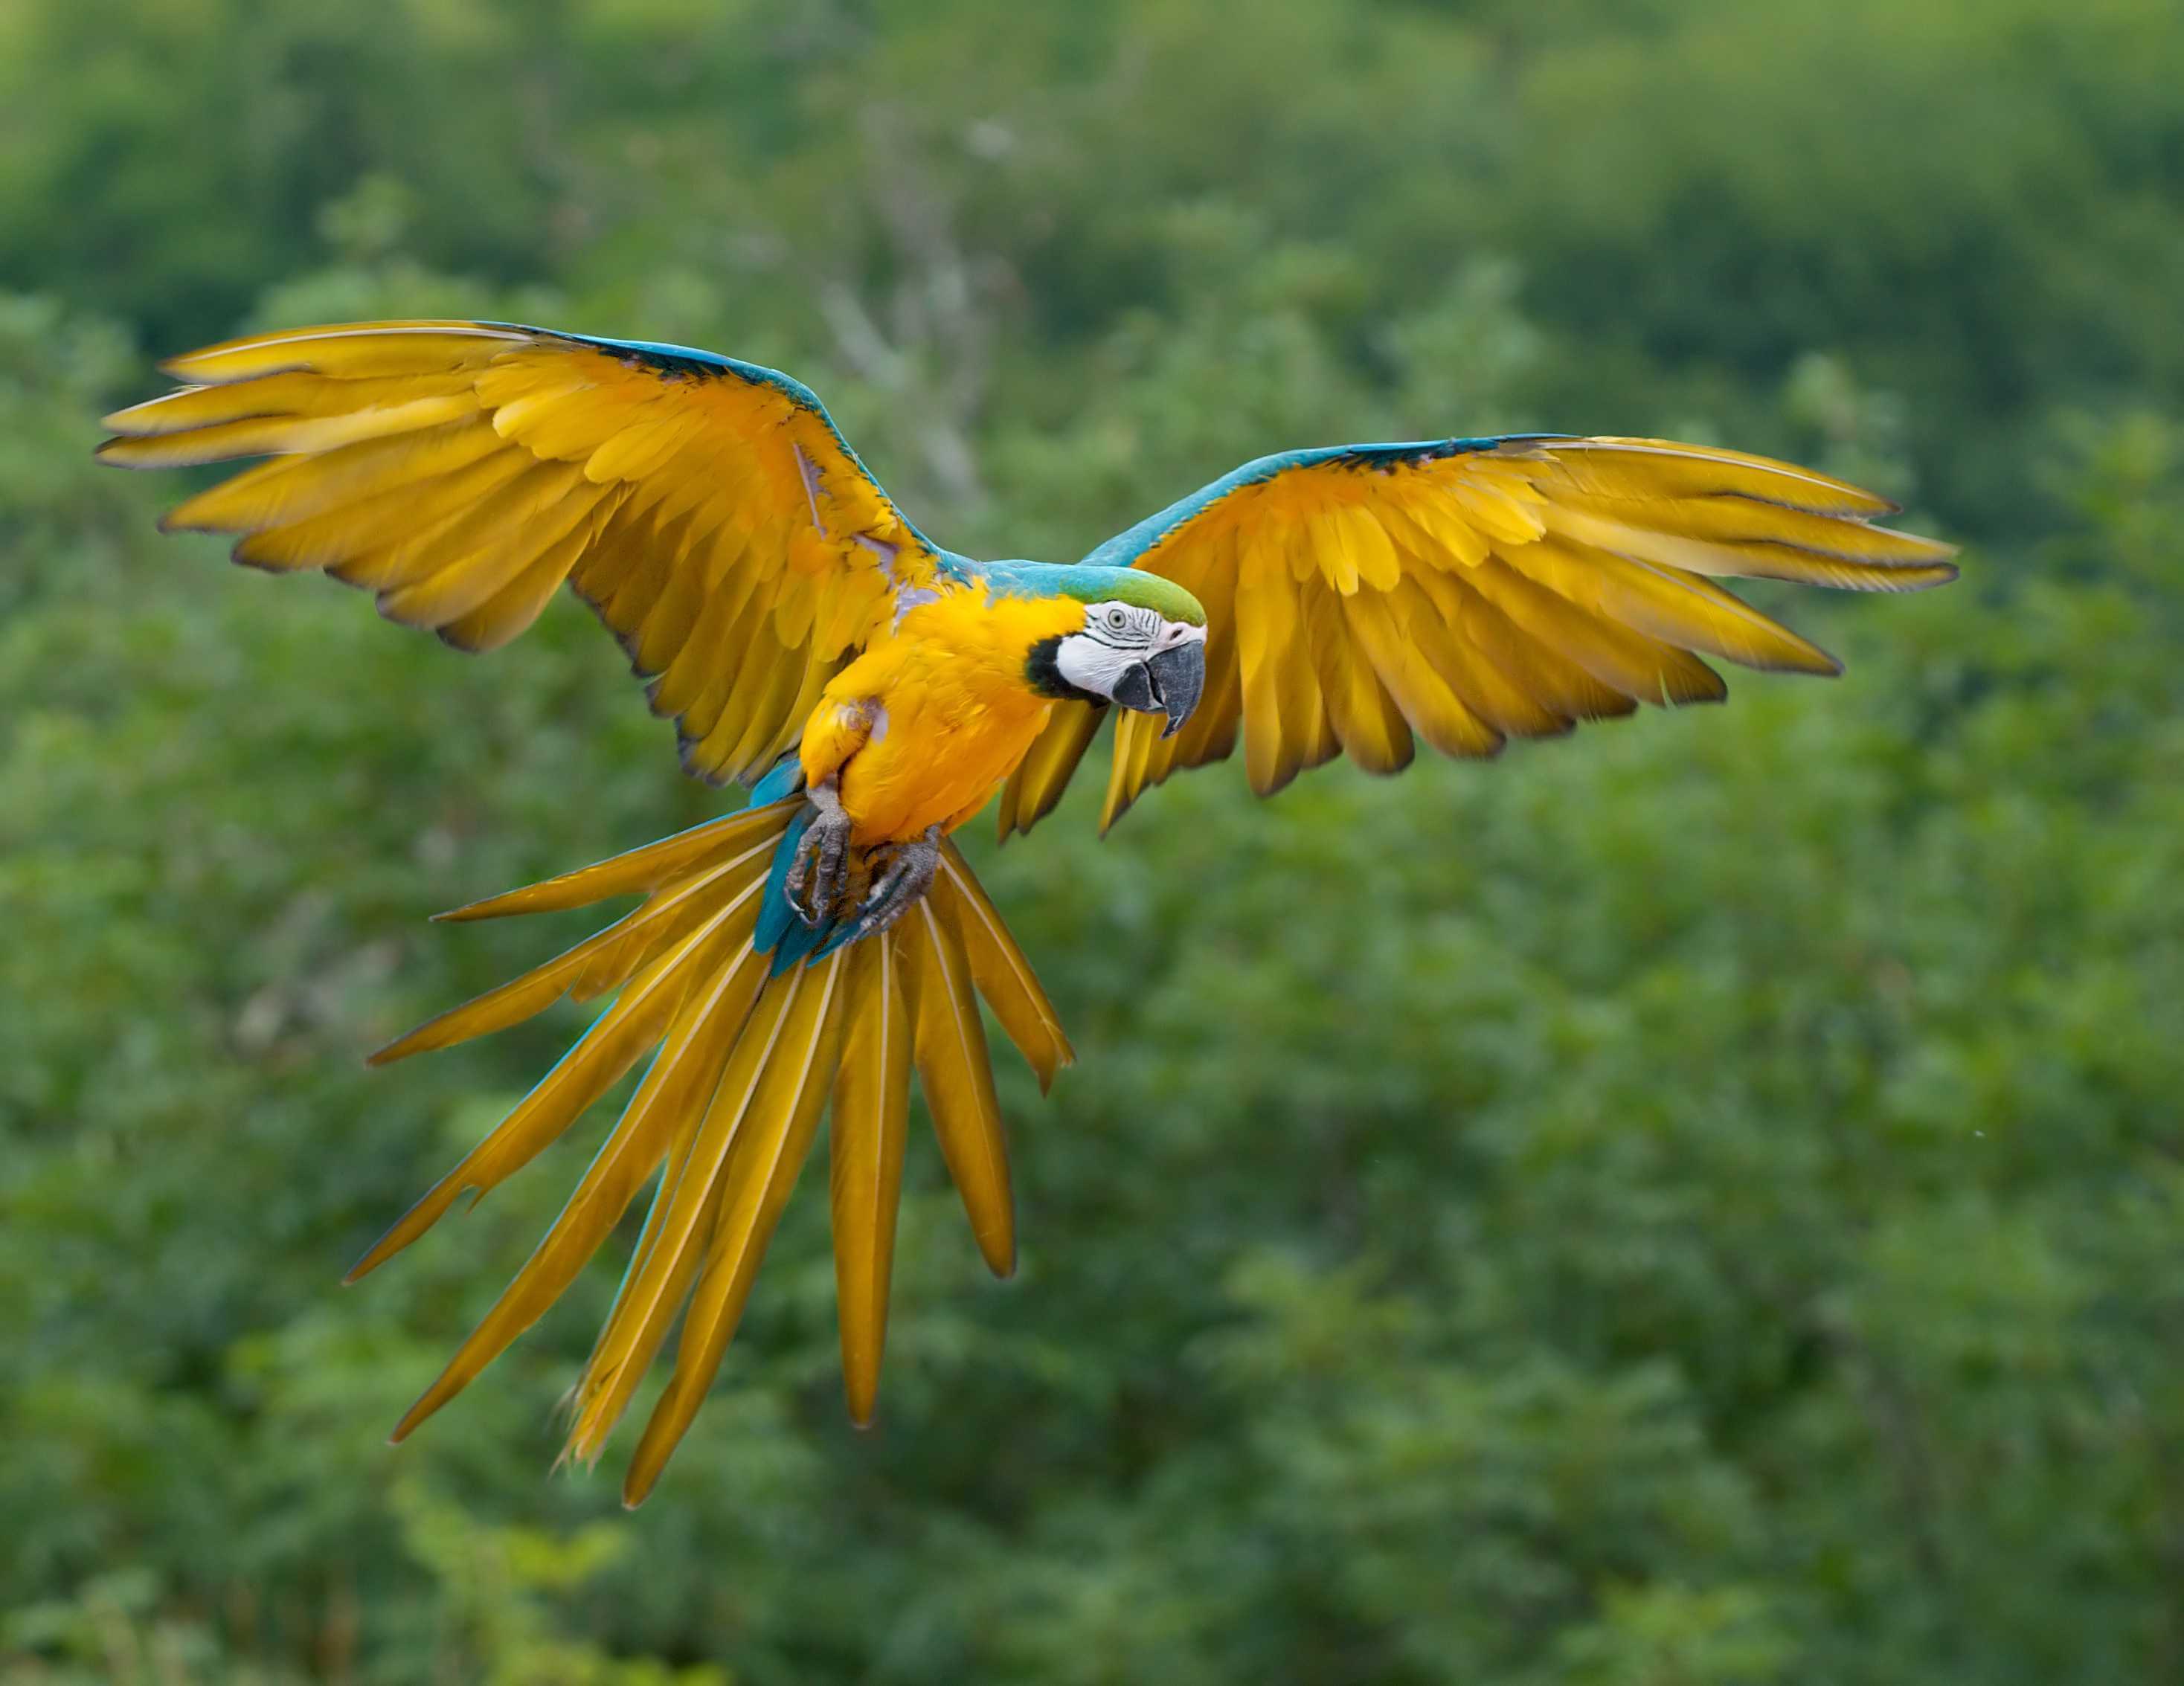 Blue And Gold Macaws: Types Of Parrots